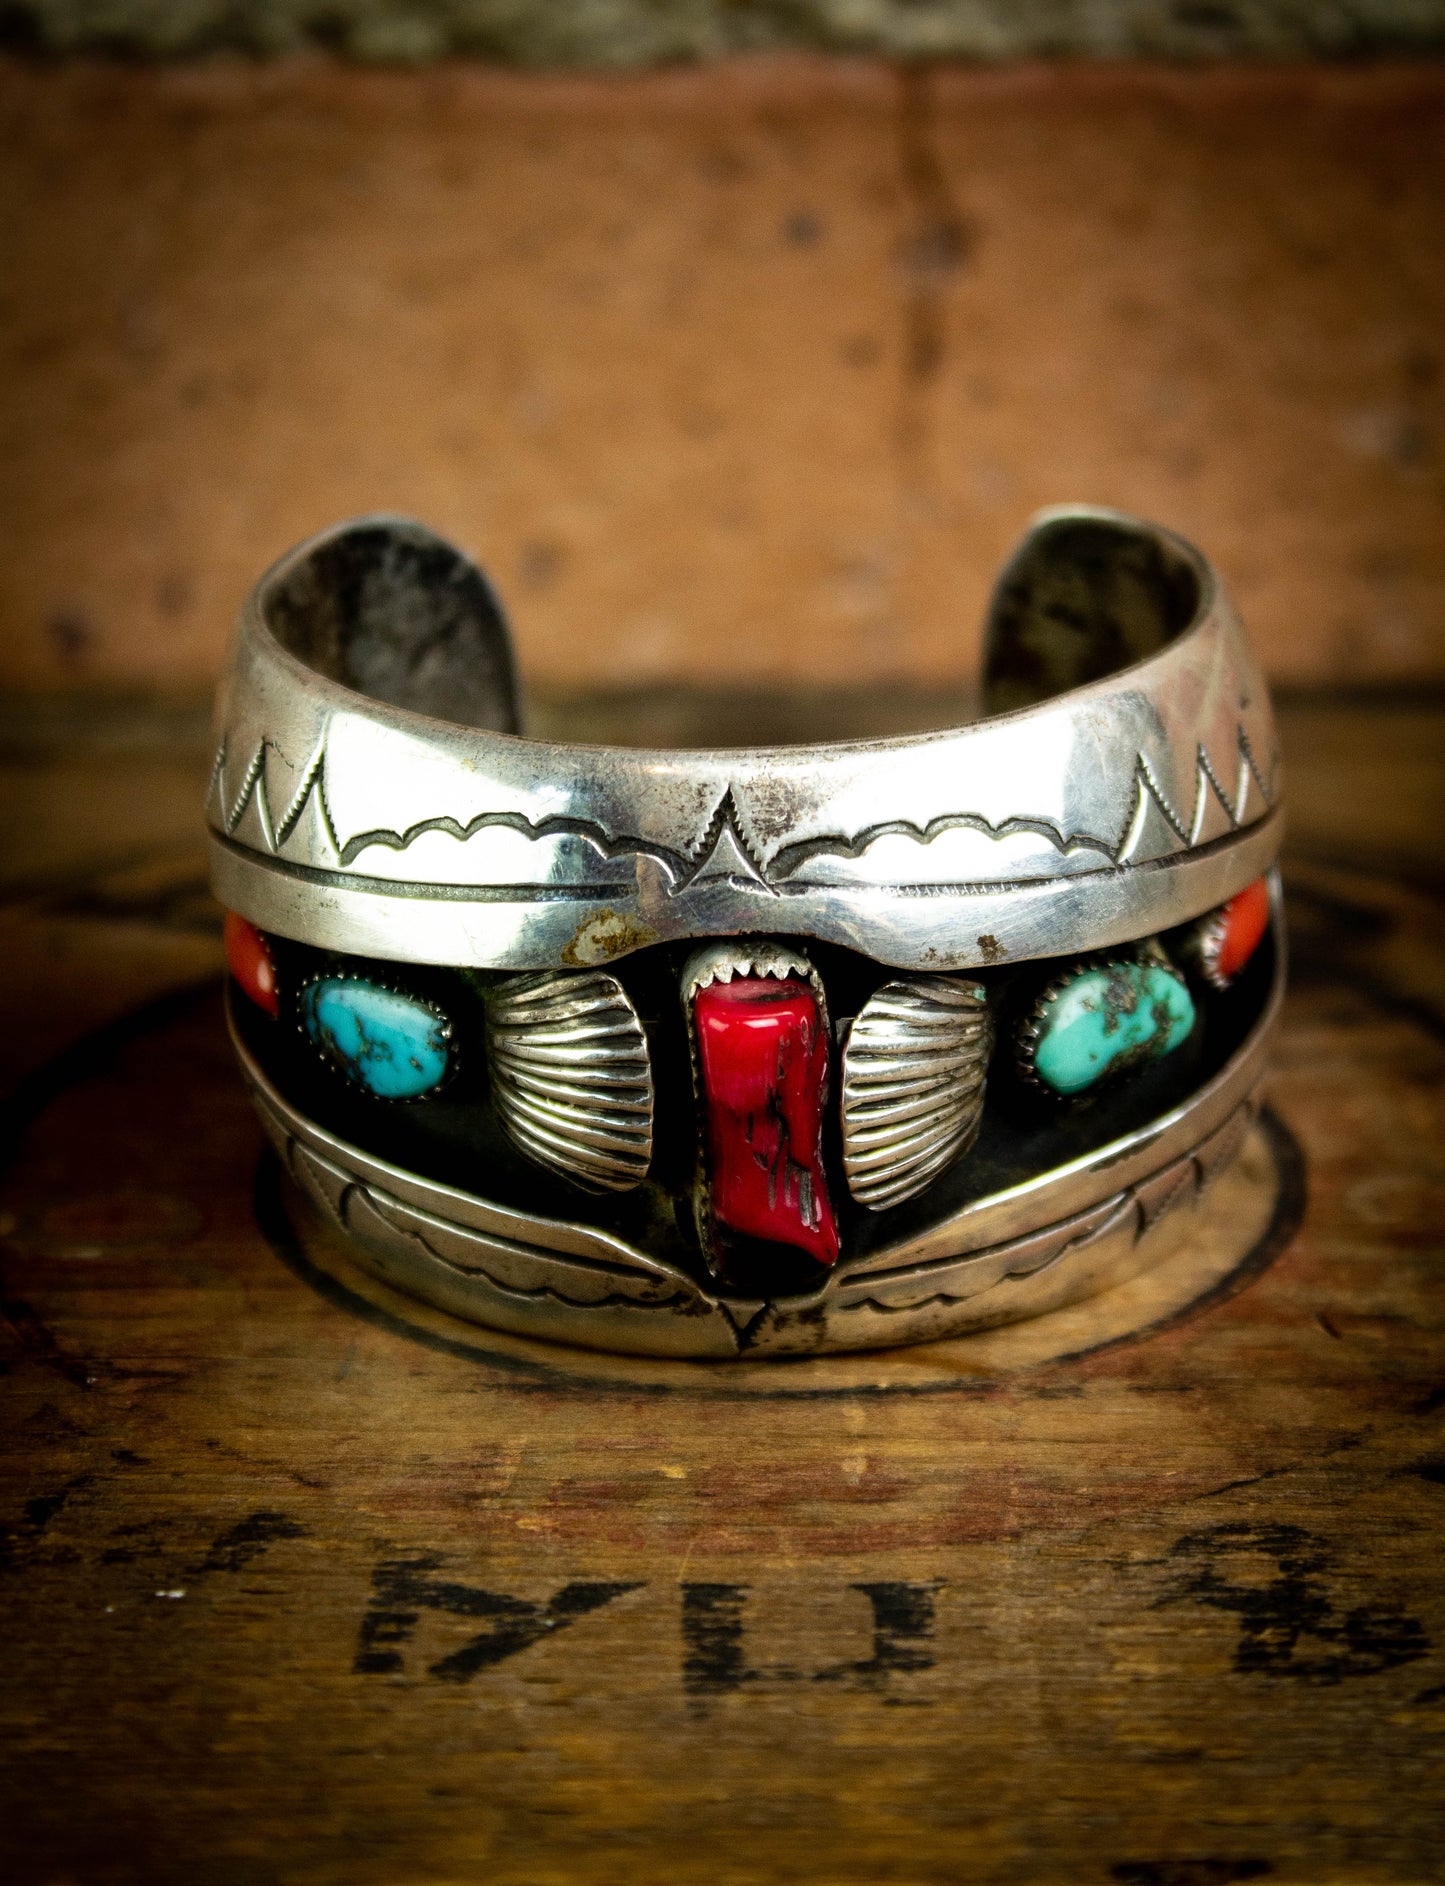 Vintage Silver Turquoise and Coral Wrist Cuff Bracelet